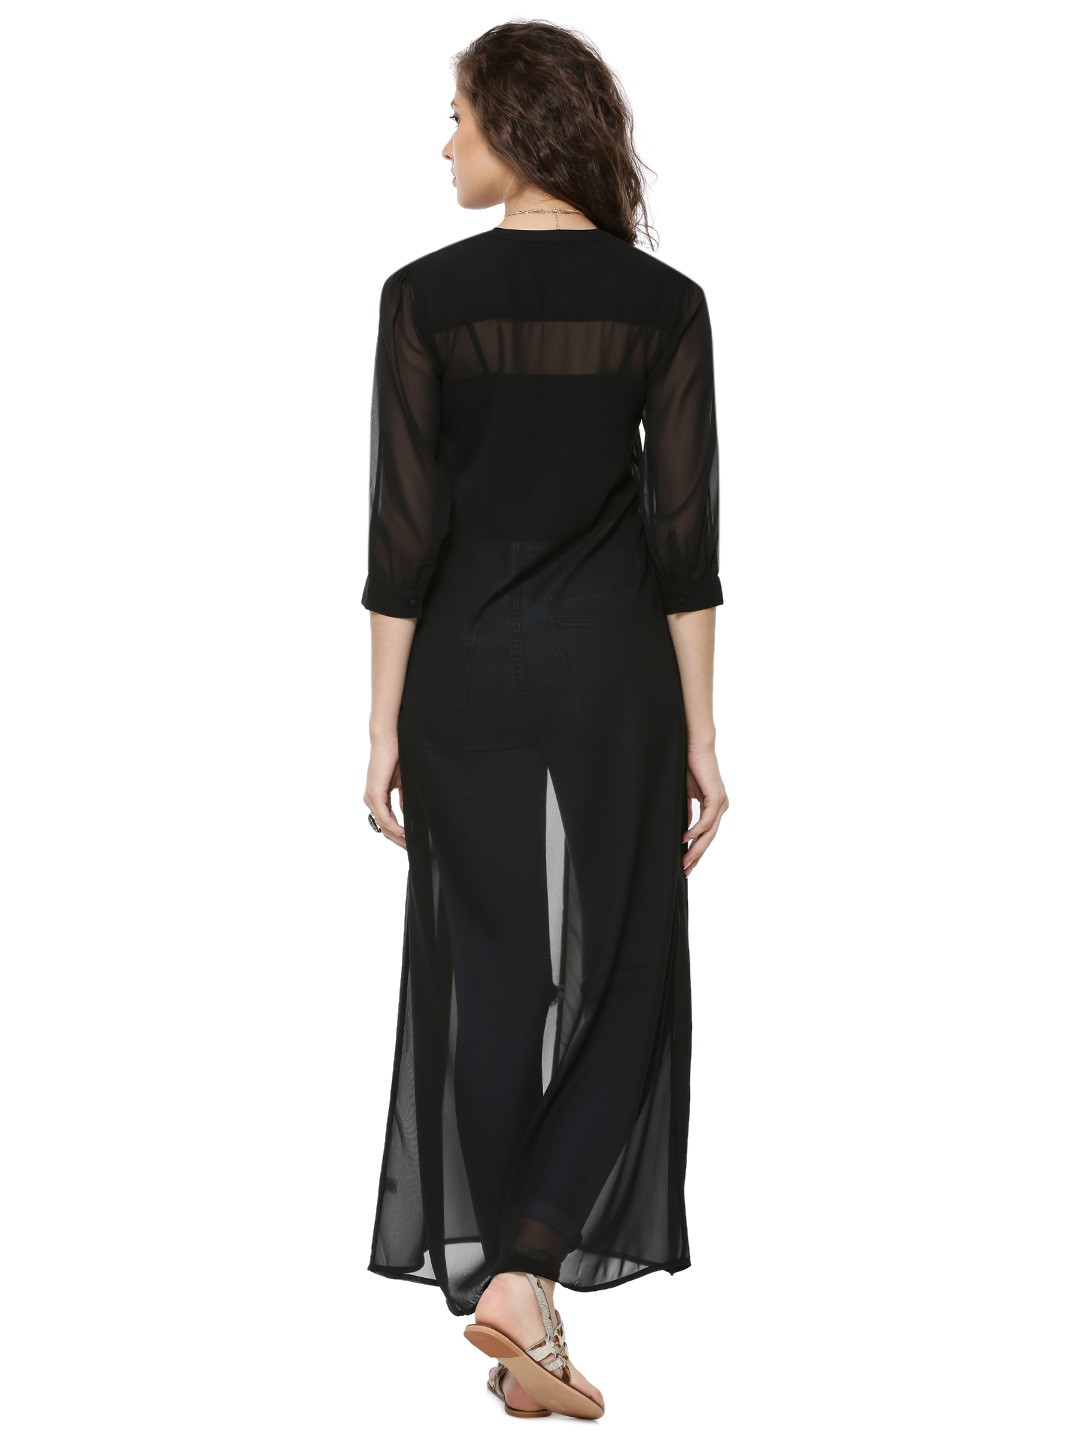 Buy Women's Sheer Maxi Cover up Online @ ₹999 from ShopClues